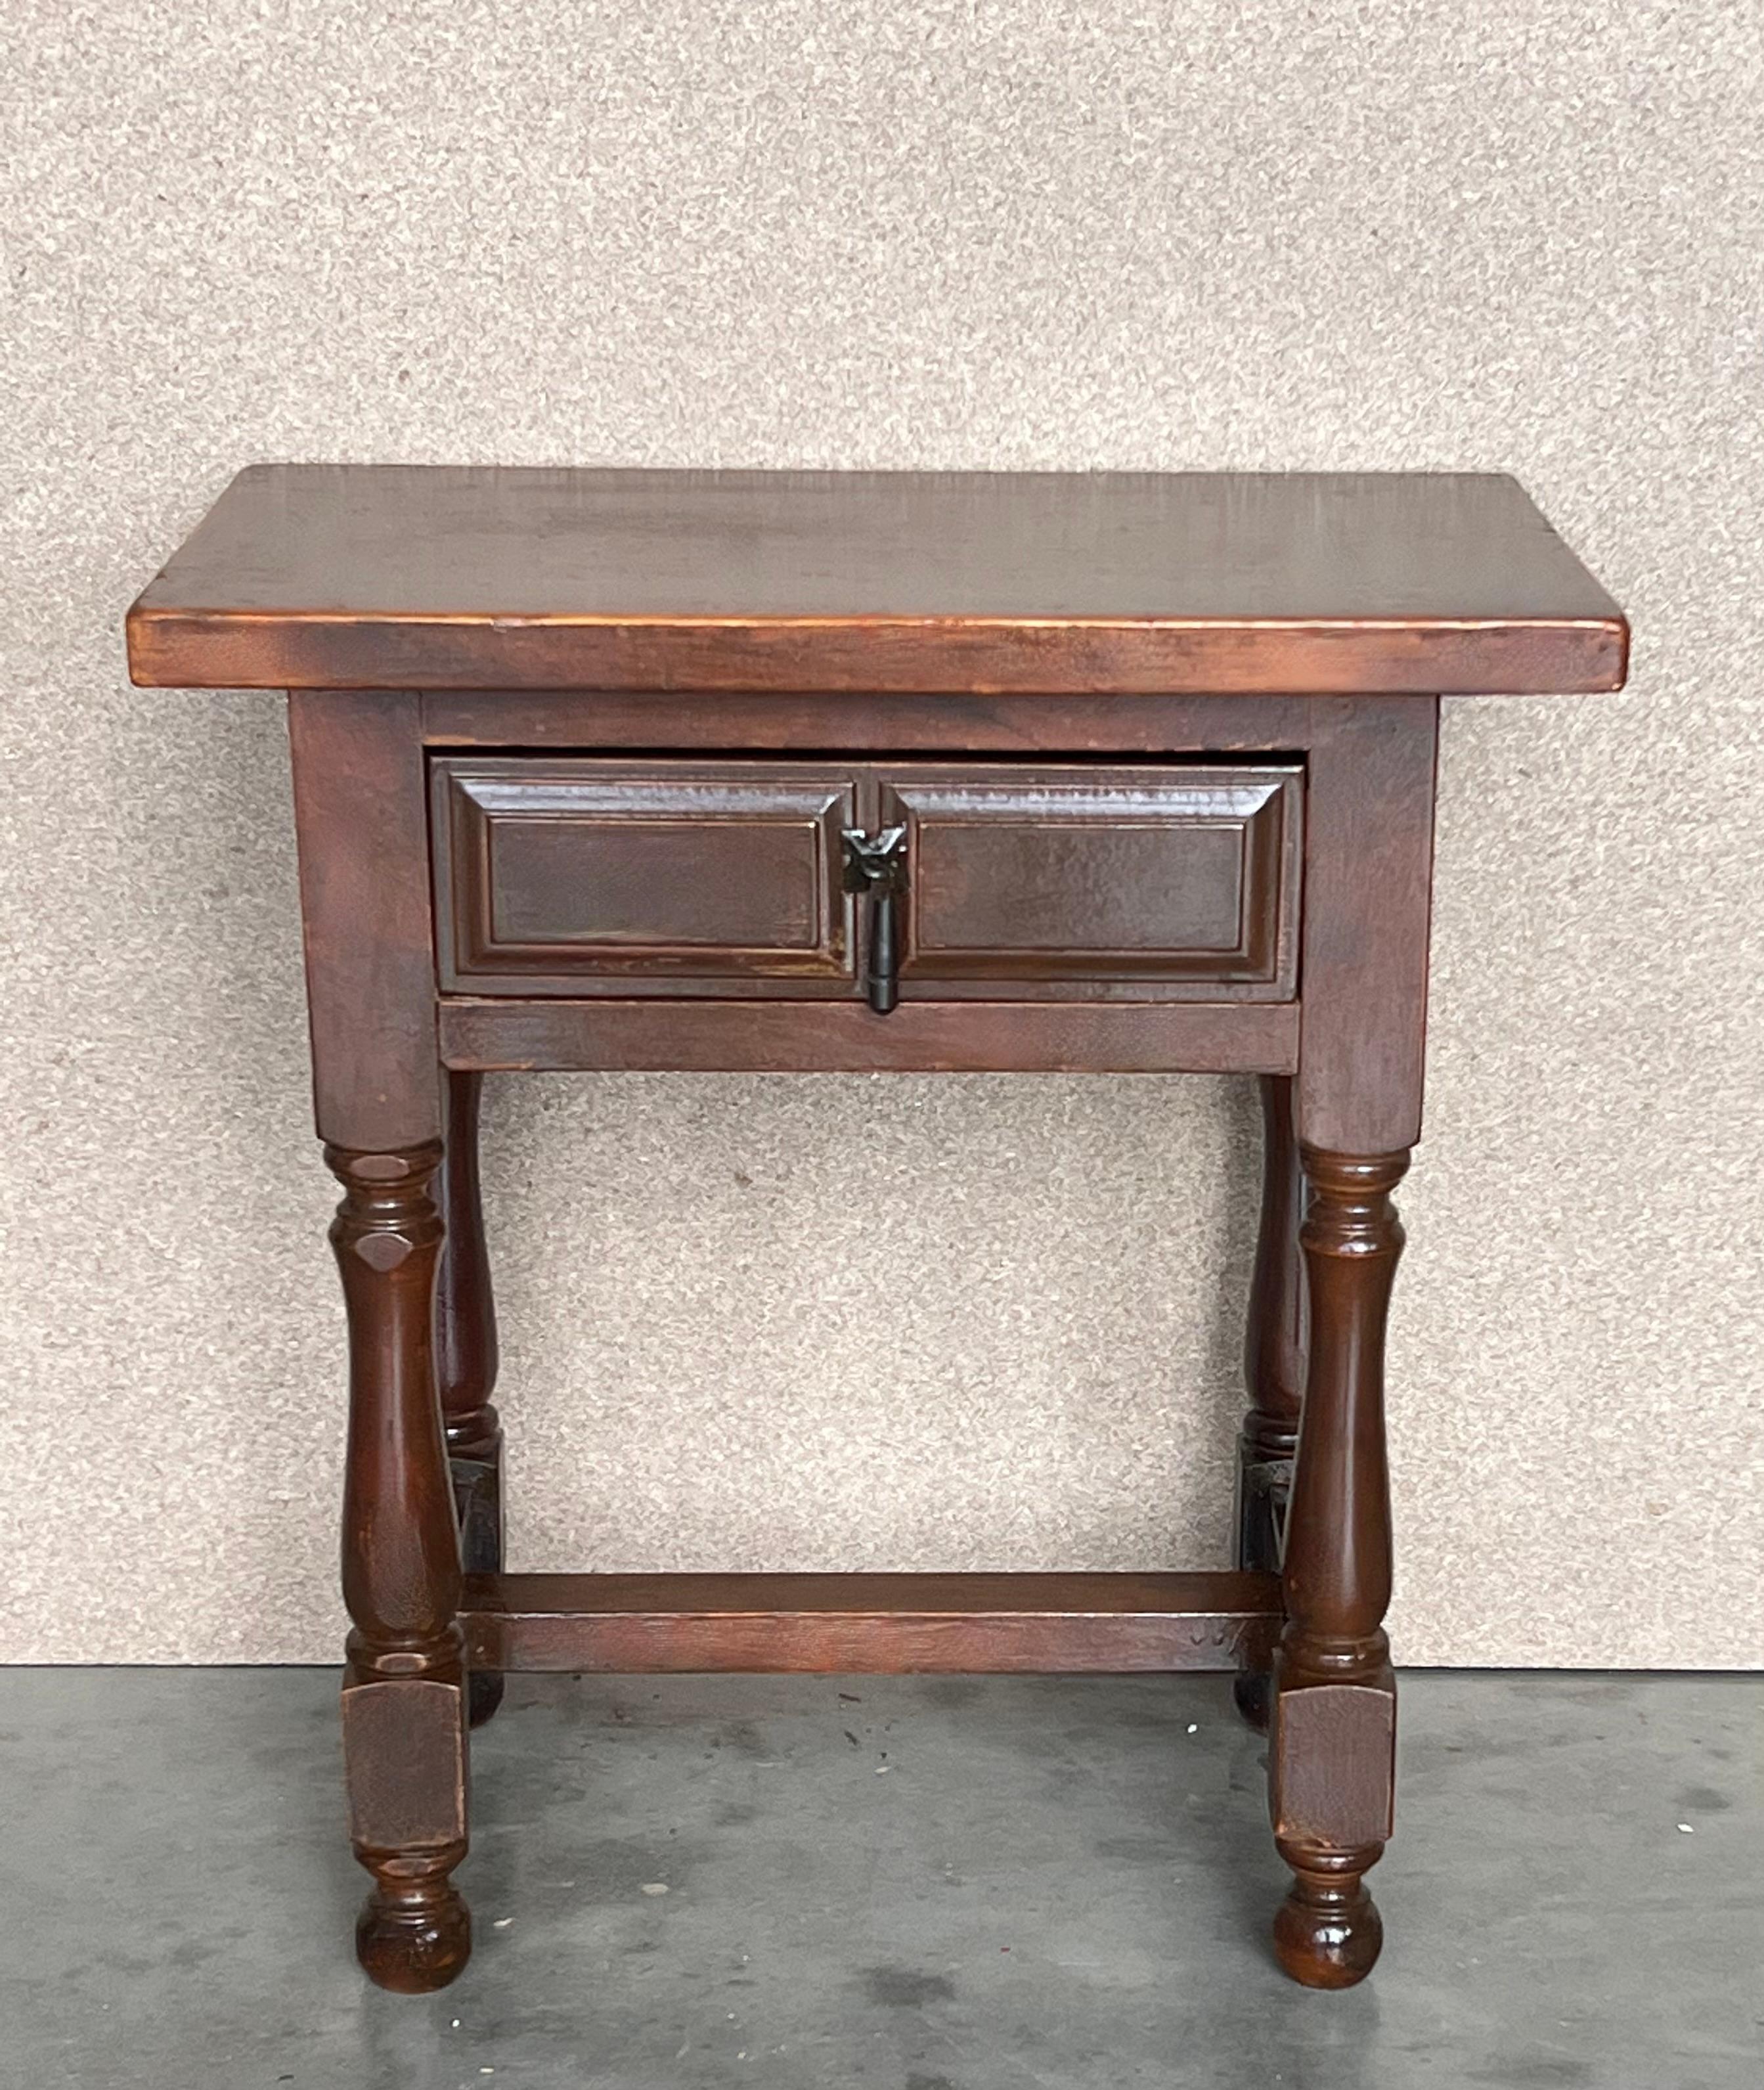 20th century Pair of Spanish nightstands with one drawer and iron hardware. The table has beautiful carved drawers with original iron pull. Beautiful tables that you can use like a nightstands or side tables, end tables or table lamp, desk or